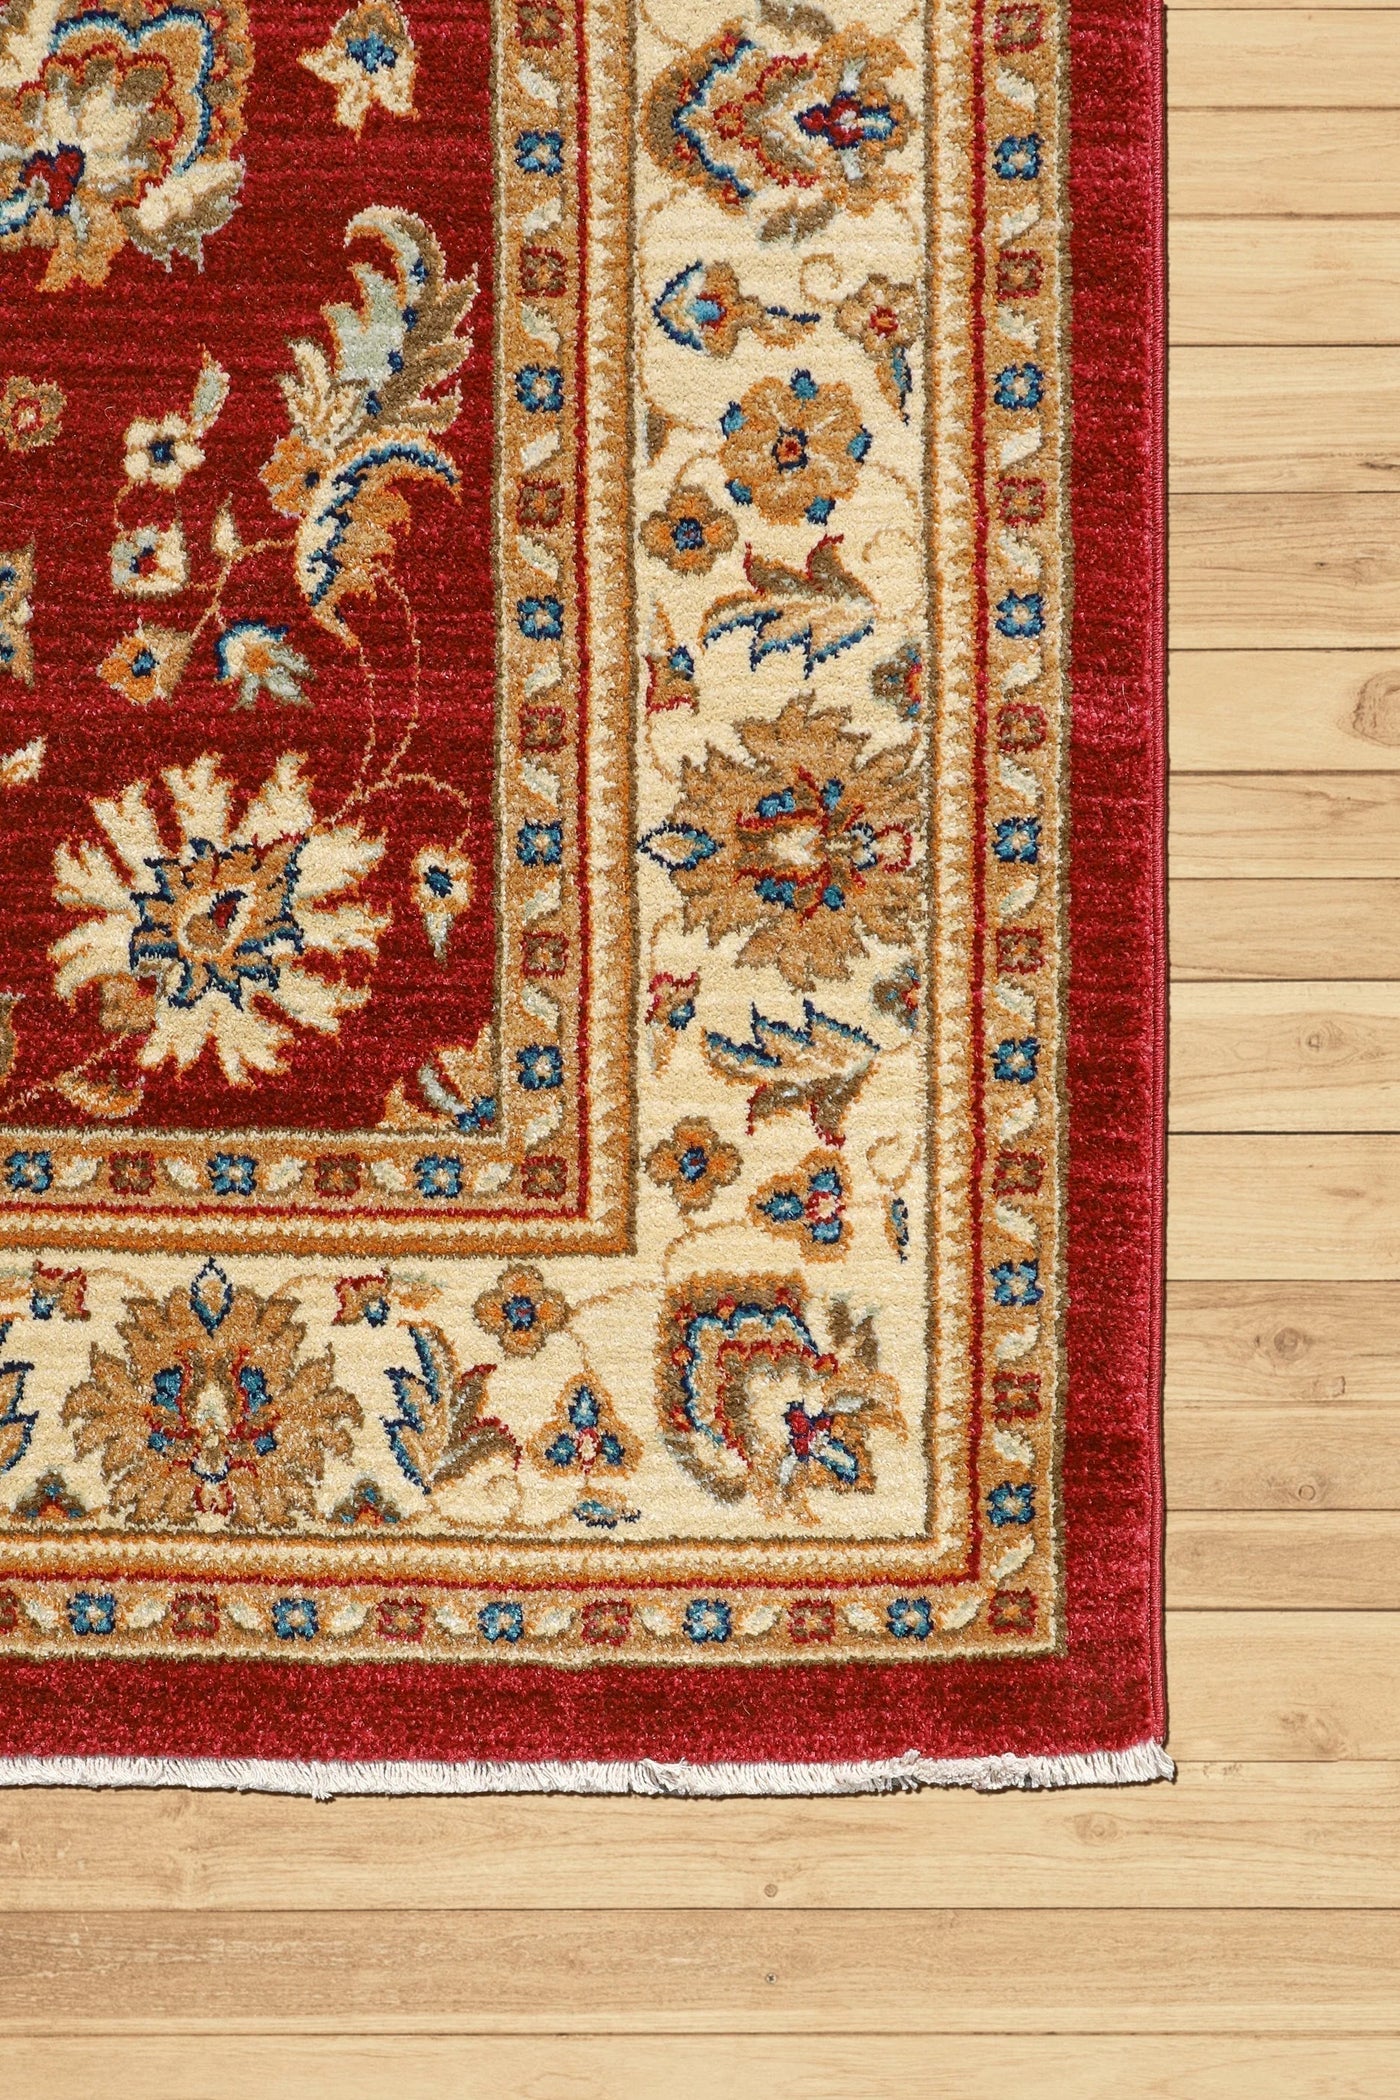 Marakesh Traditional Rug 1259 Red Ivory